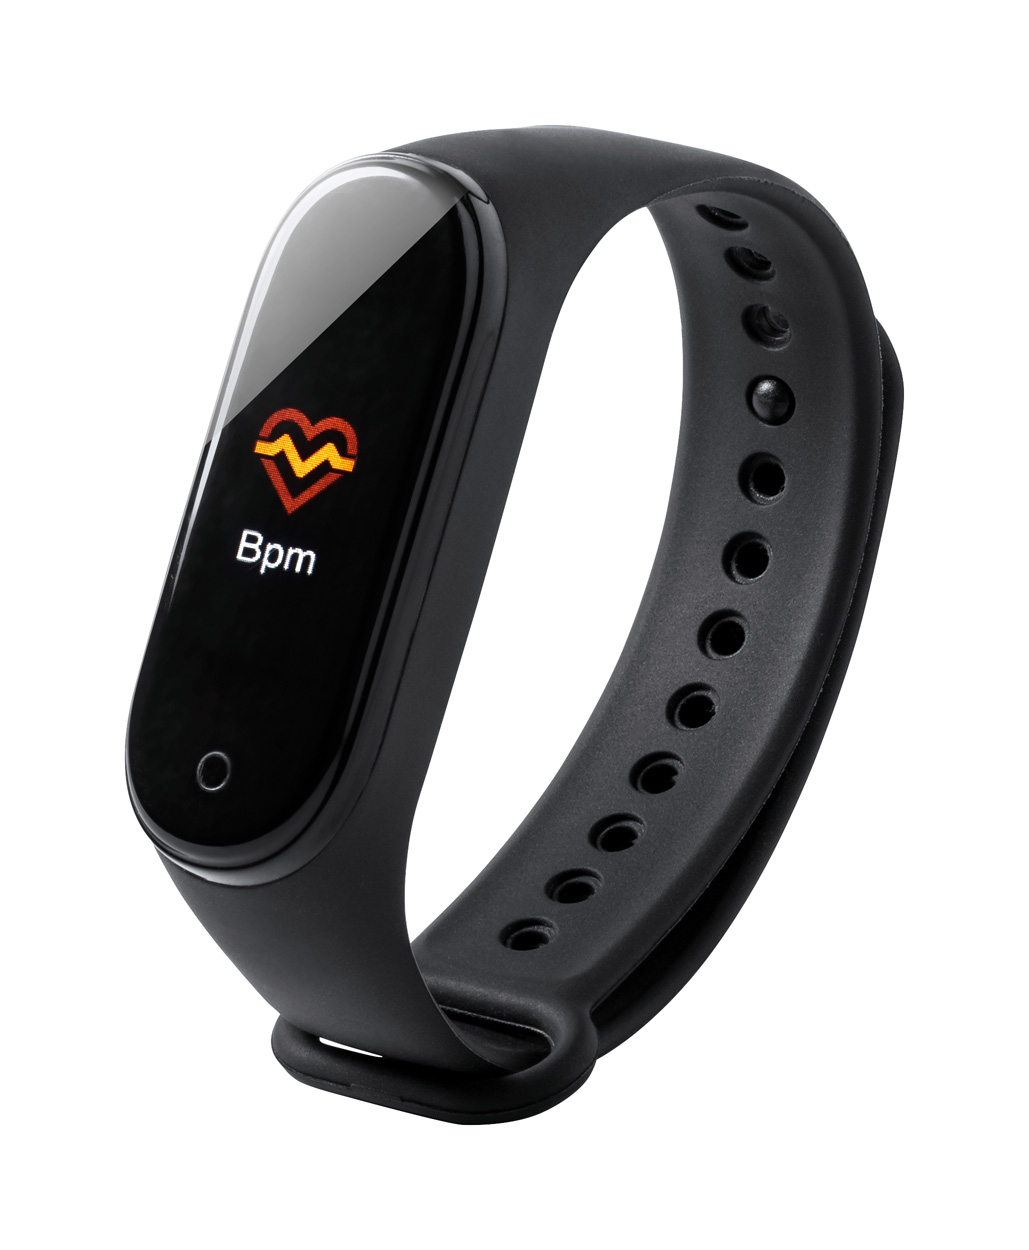 Droy thermometer smart watch